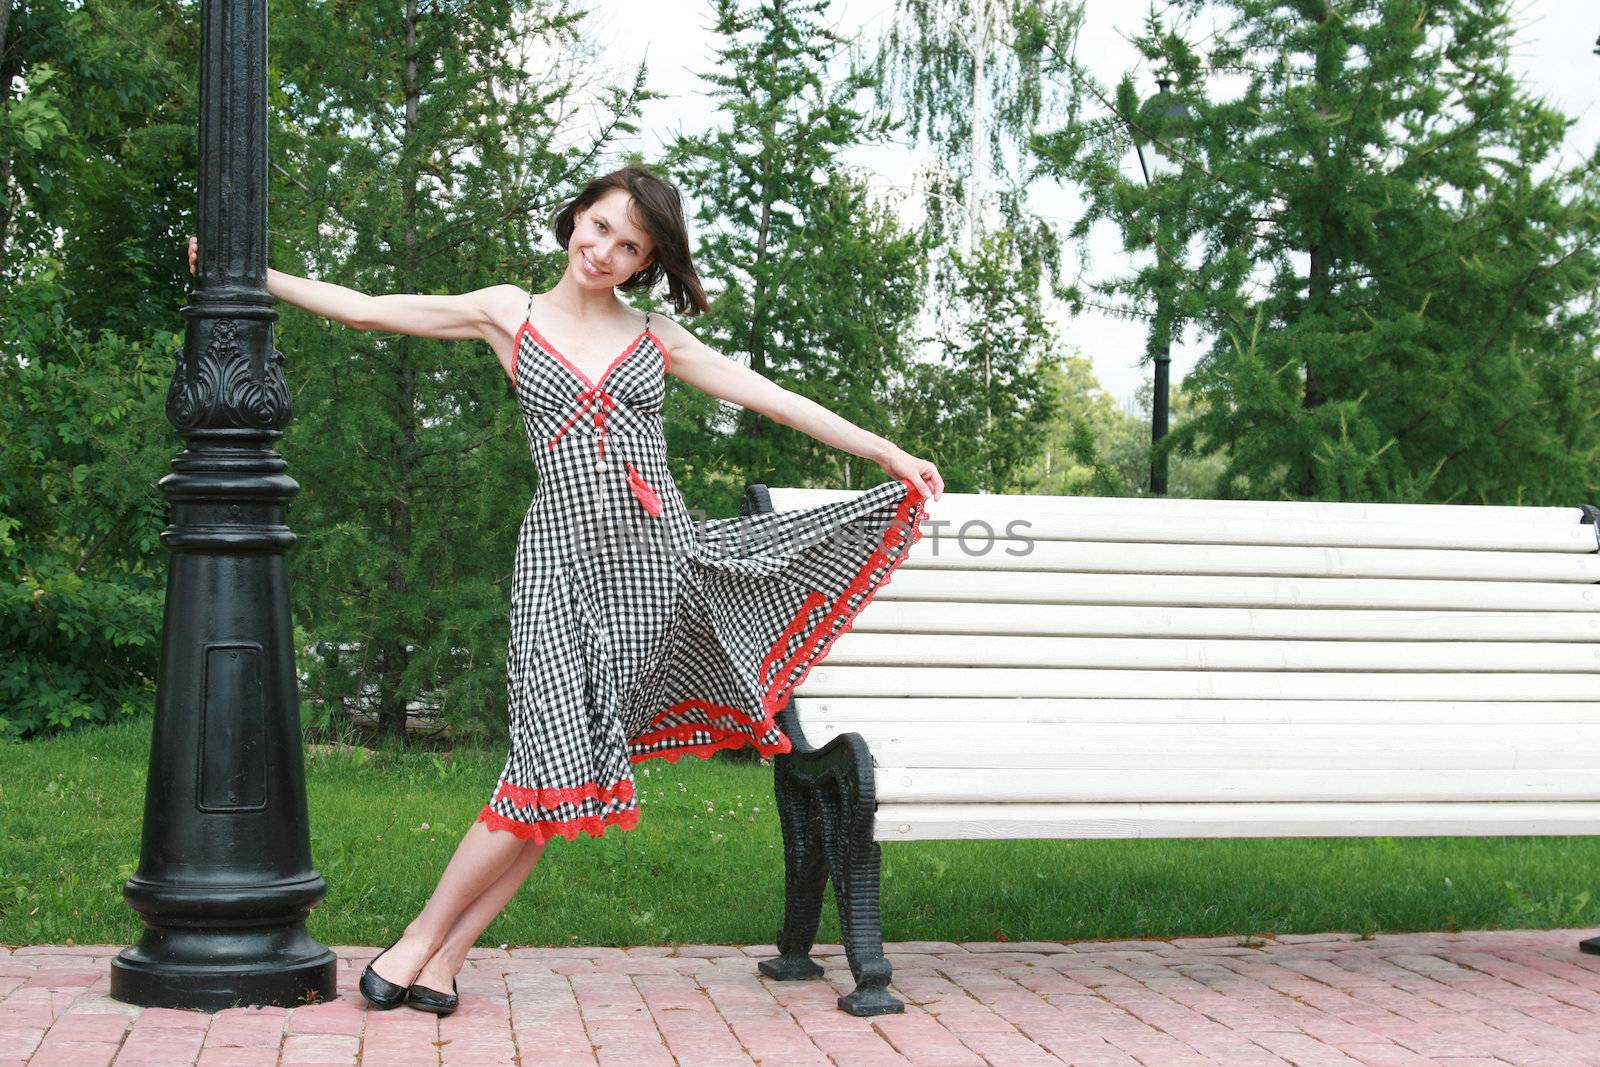 The beautiful girl poses at a lamppost and a bench